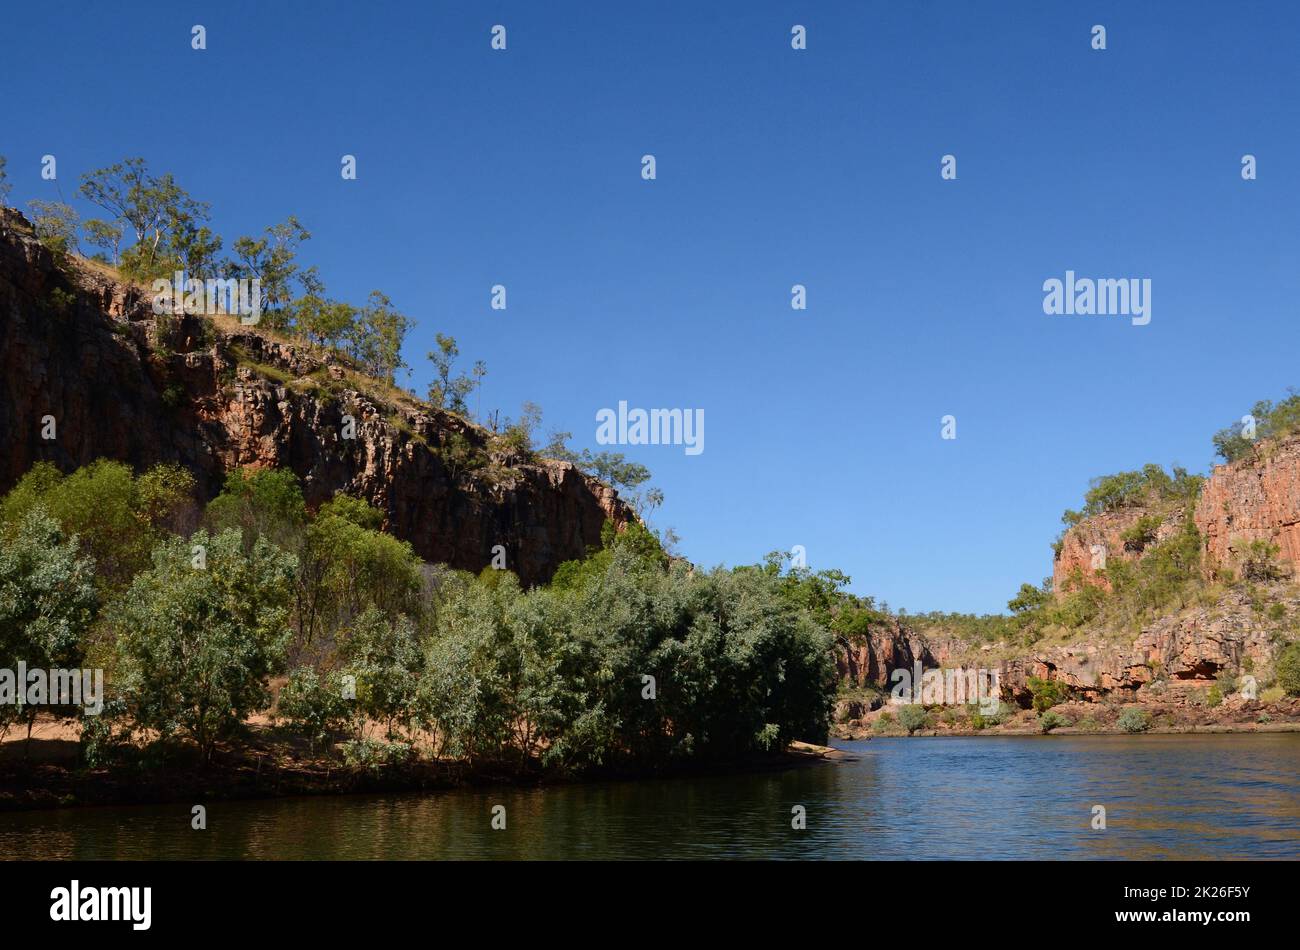 A view along the Katherine Gorge in the Northern Territory of Australia Stock Photo